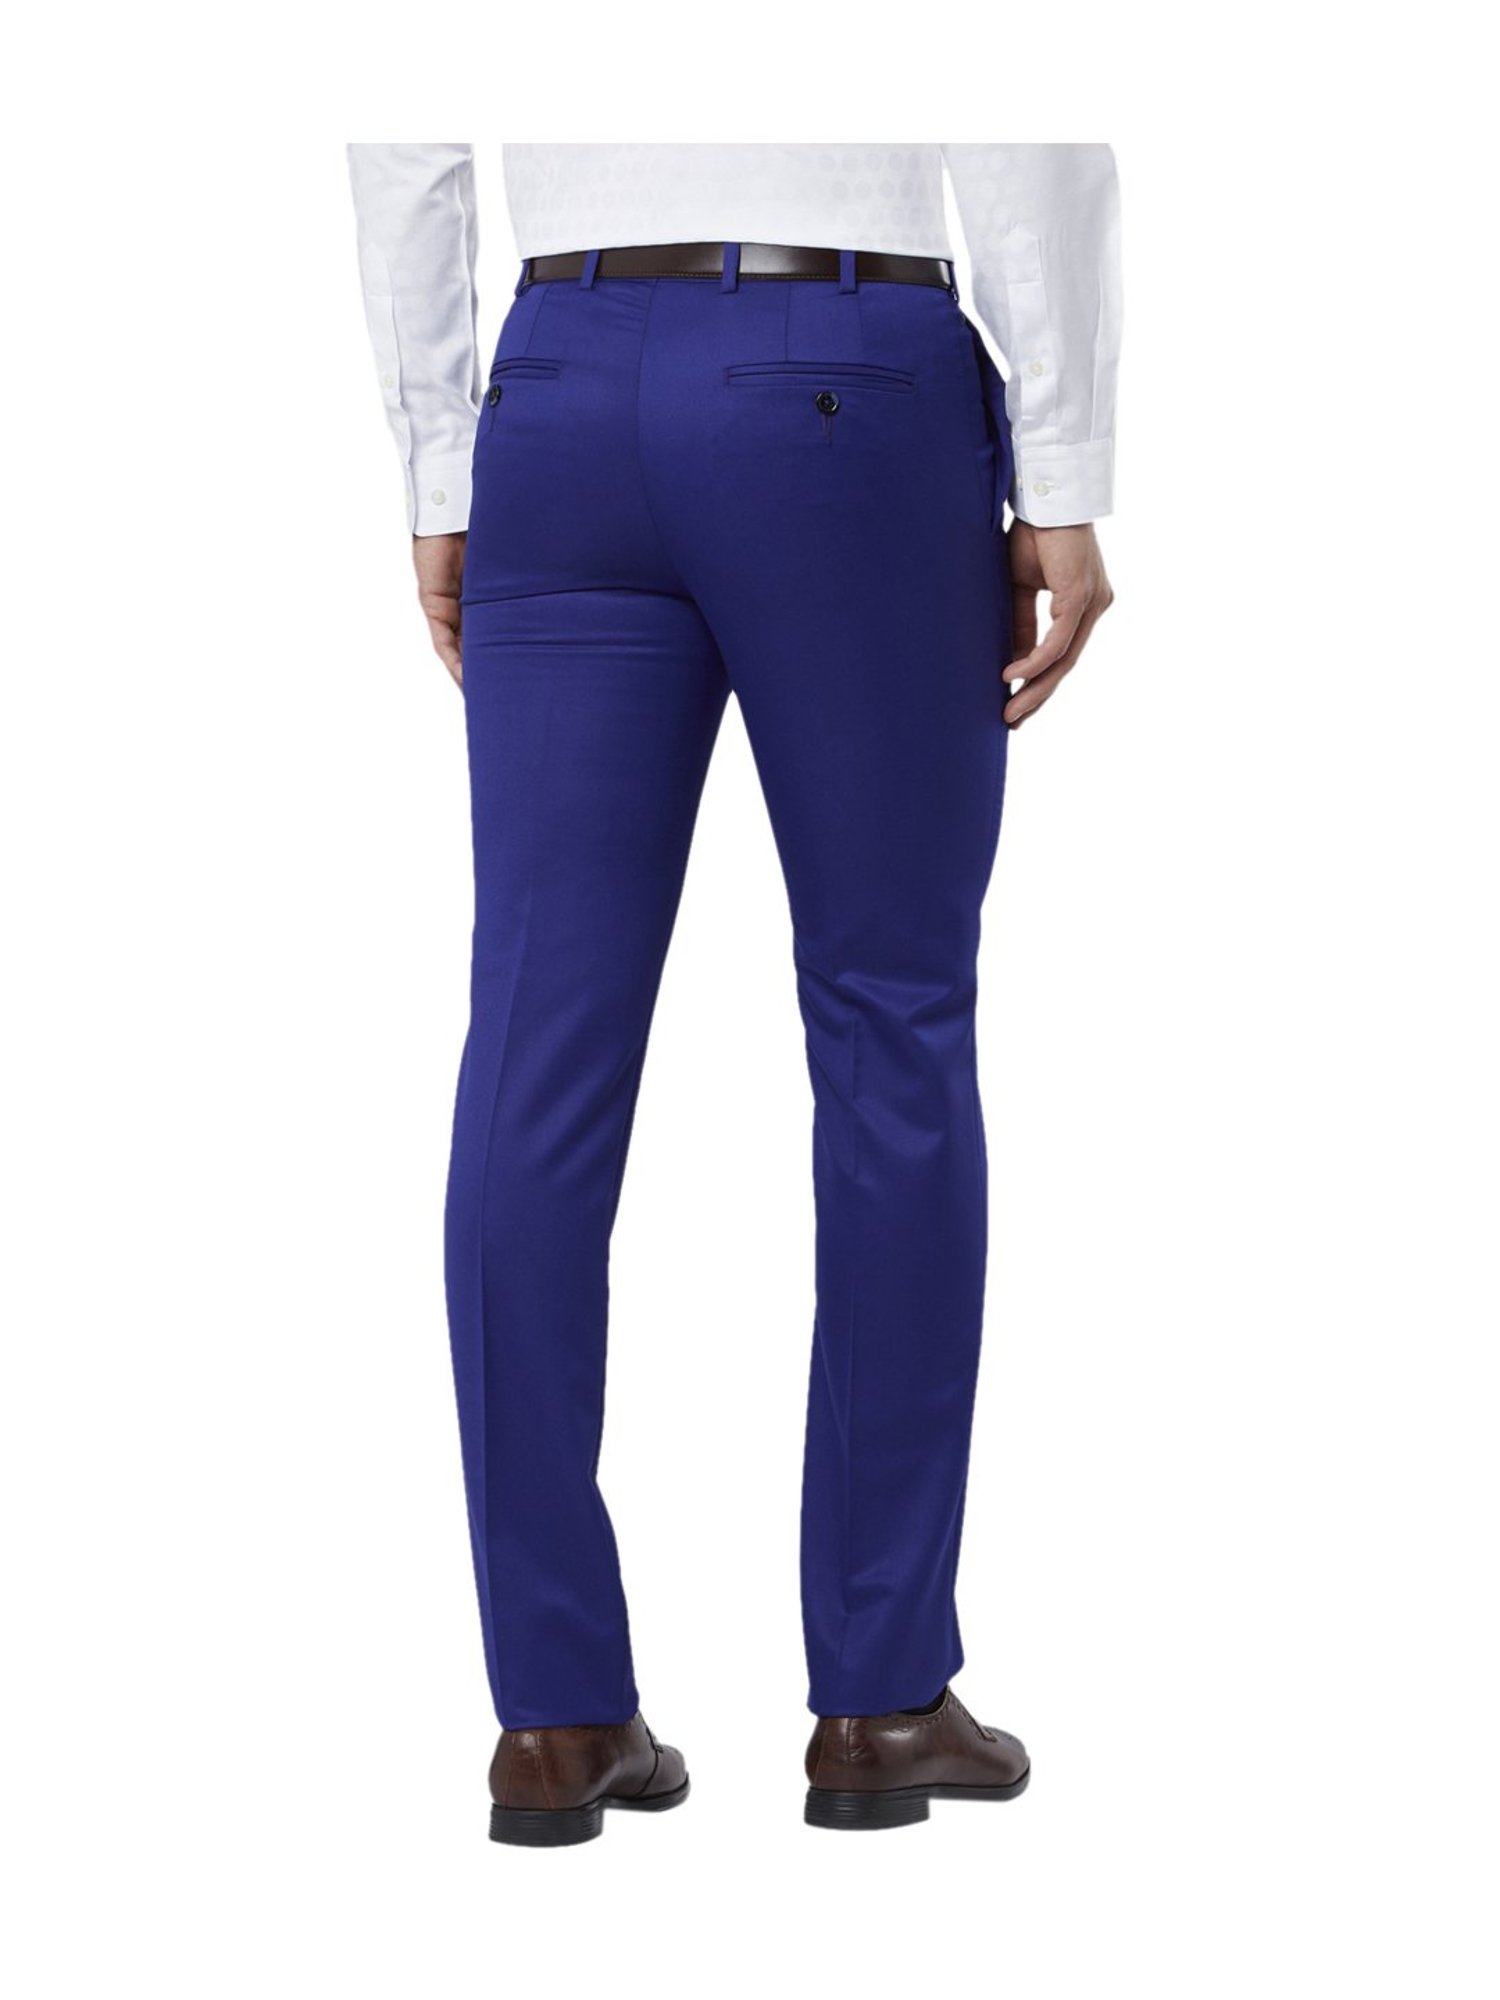 Buy Regular Trouser Pants Maroon Sky Blue and Black Combo of 3 Cotton for  Best Price Reviews Free Shipping